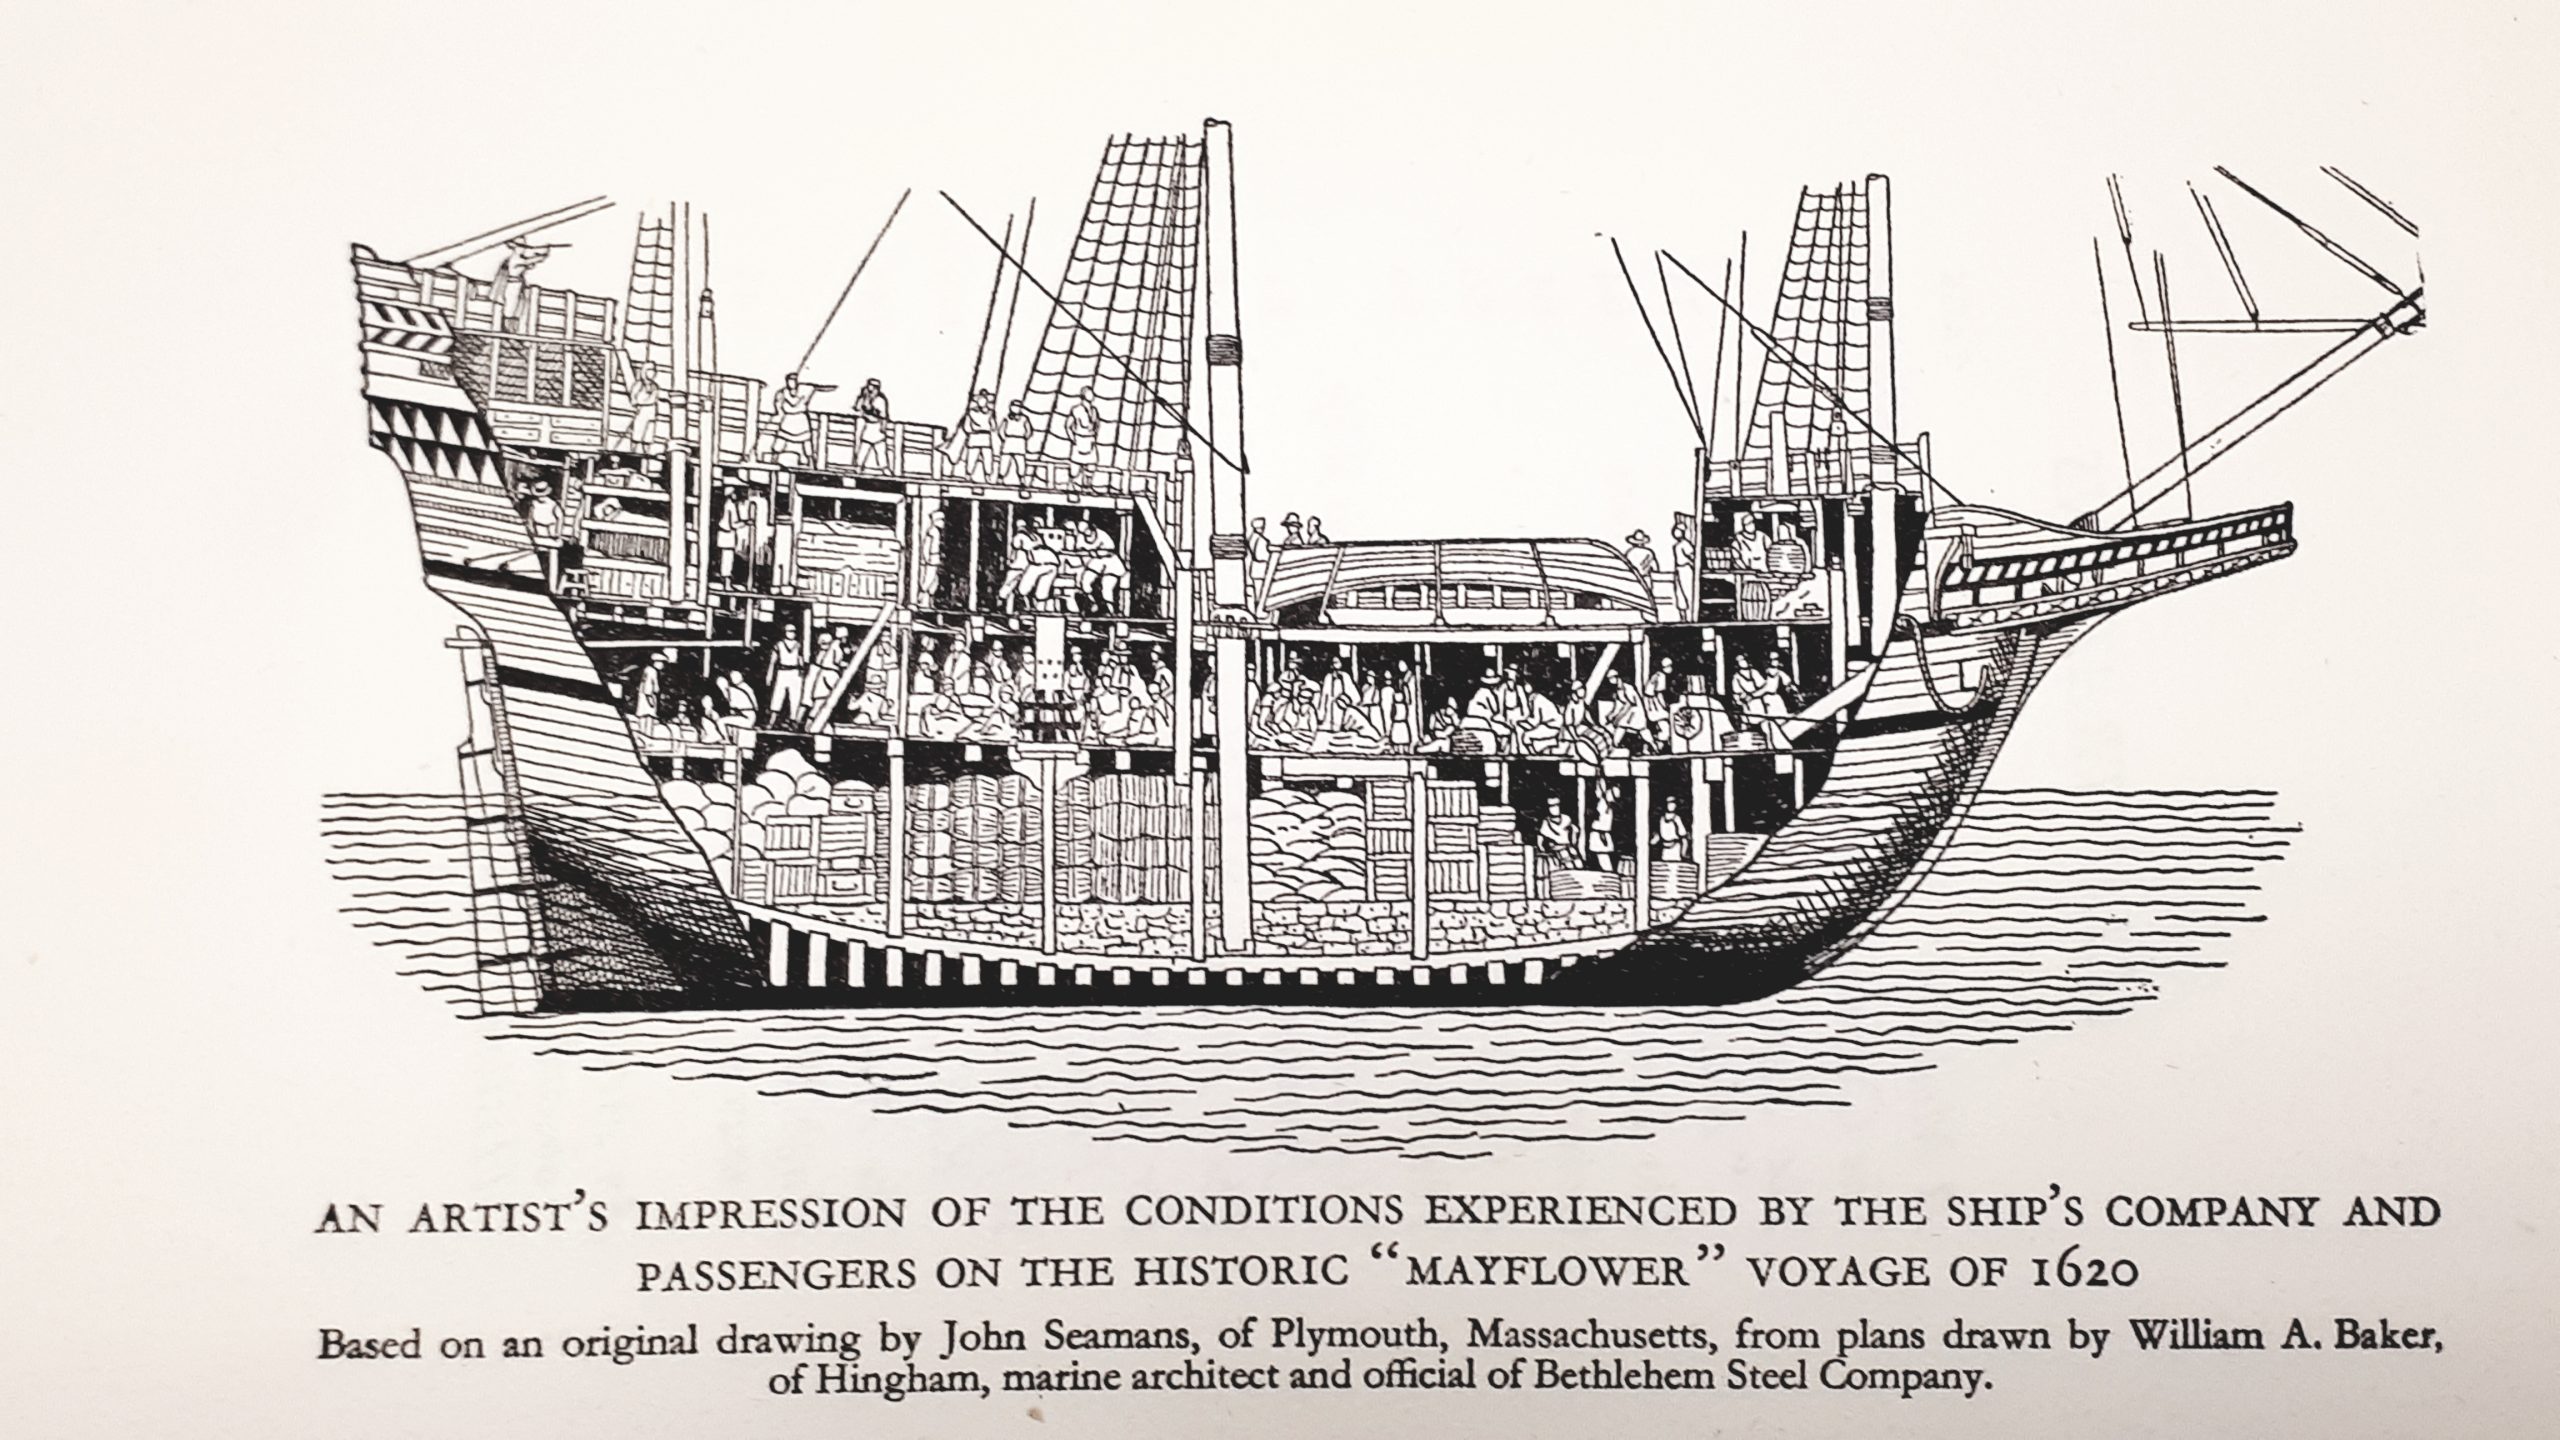 An artists’s impression of the conditions experienced by the ship’s company and passengers on the historic “Mayflower” Voyage of 1620 © D. Kenelm Winslow, 1957